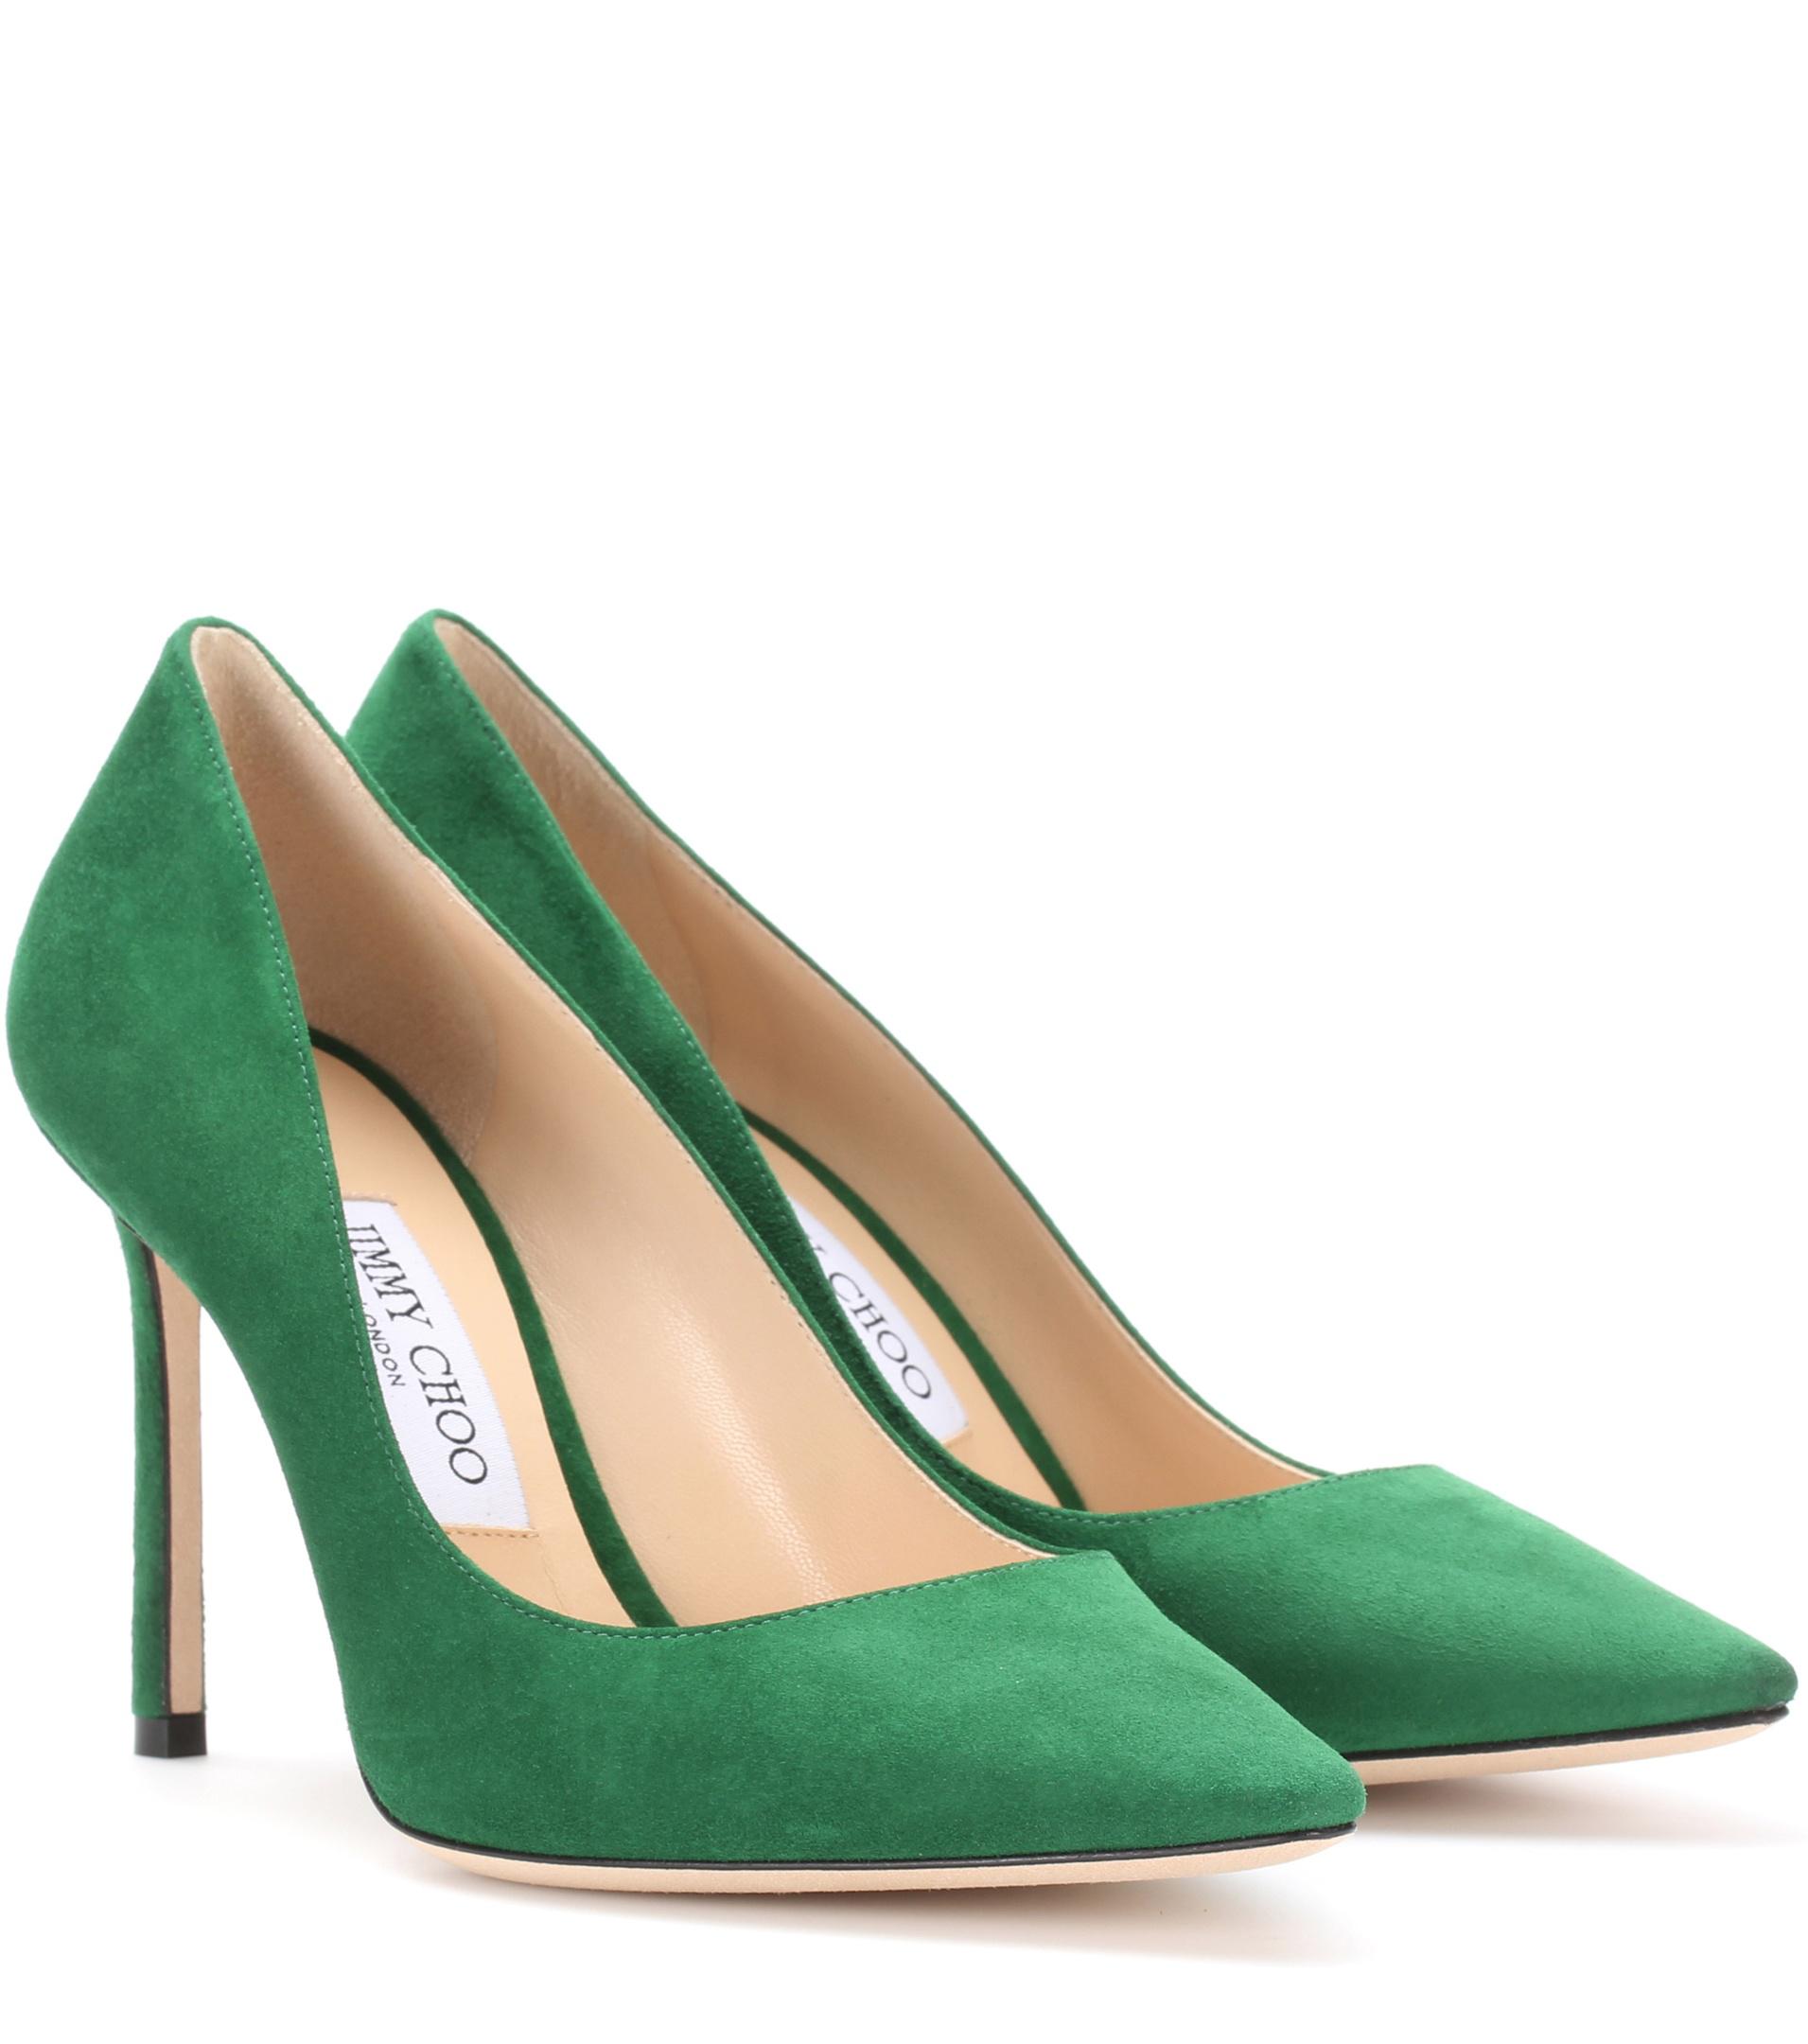 besejret dusin Manager Jimmy Choo Romy 100 Suede Pumps in Green - Lyst